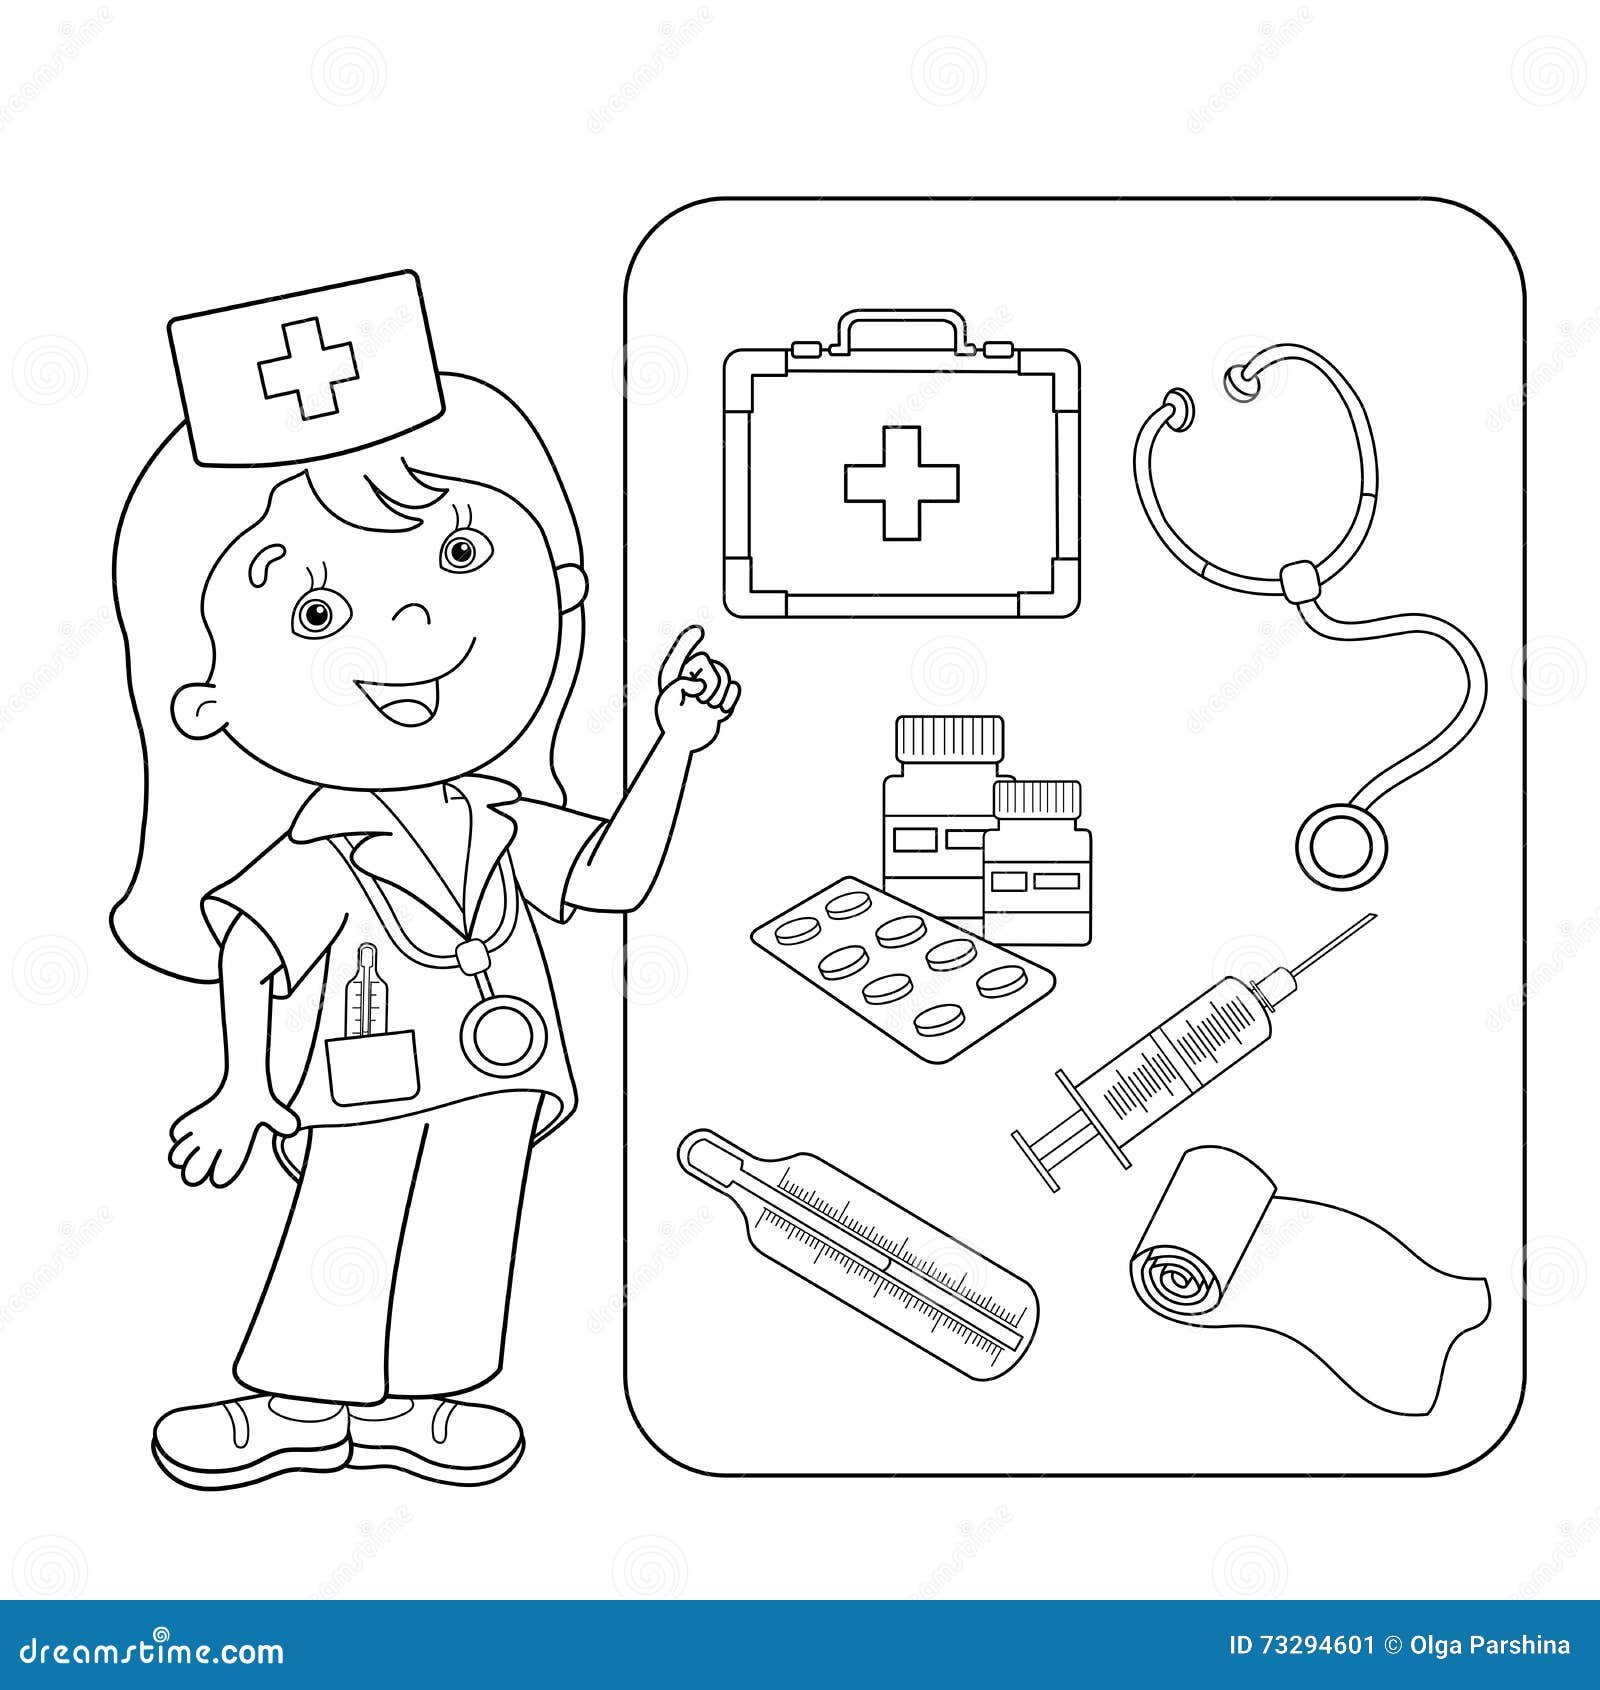 Download Coloring Page Outline Of Cartoon Doctor With First Aid Kit. Stock Vector - Illustration of ...